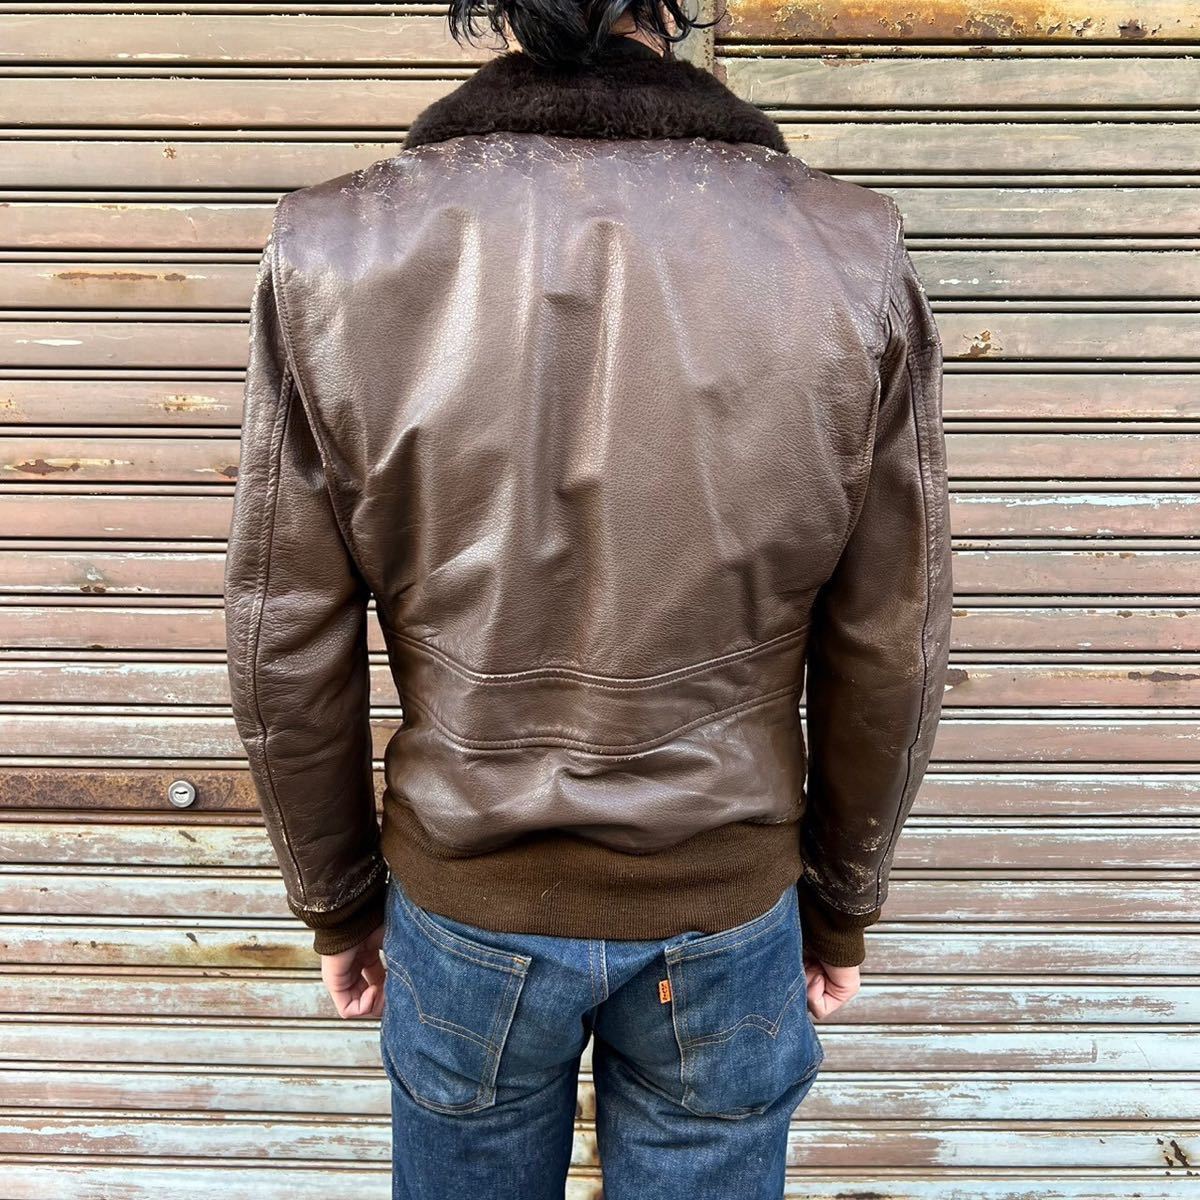 70s the US armed forces practical use G-1 Mil-J-7823E leather jacket Vintage USN USNAVY navy flight jacket the truth thing collar boa Pilot 36 60s